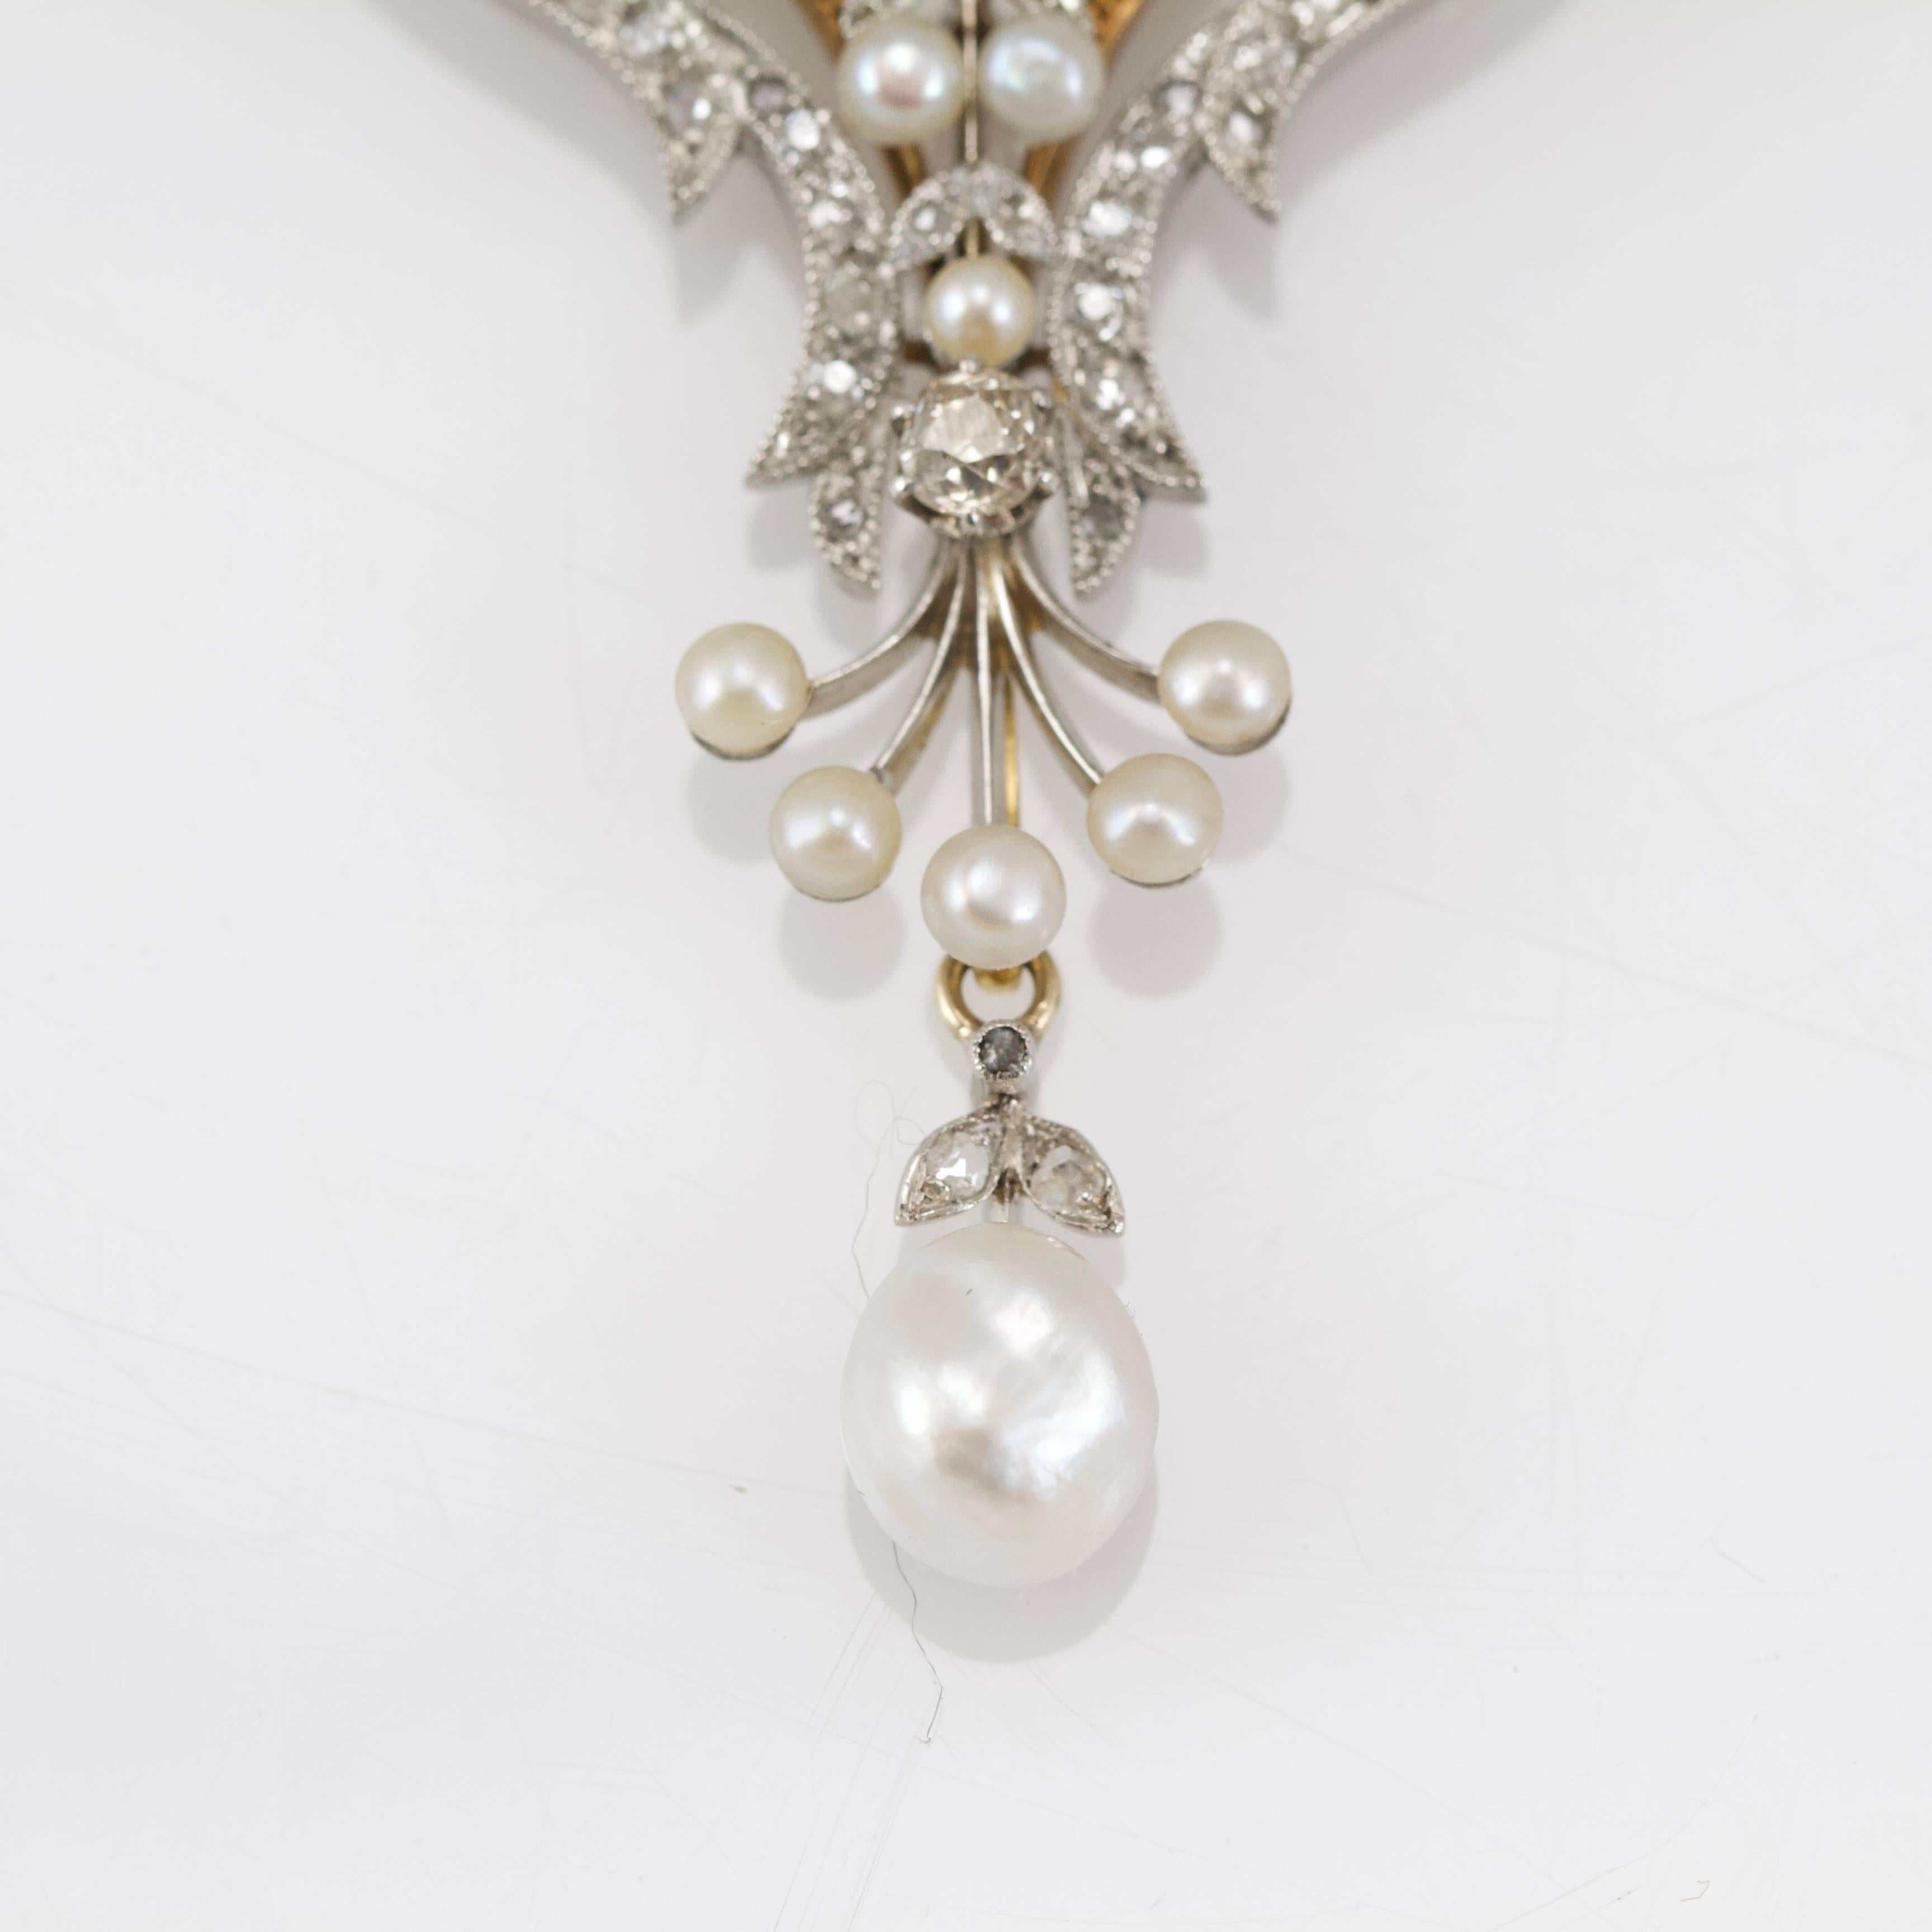 Belle Epoque Diamond, Spinelle, Garnet and Pearls Necklace from Paris 5